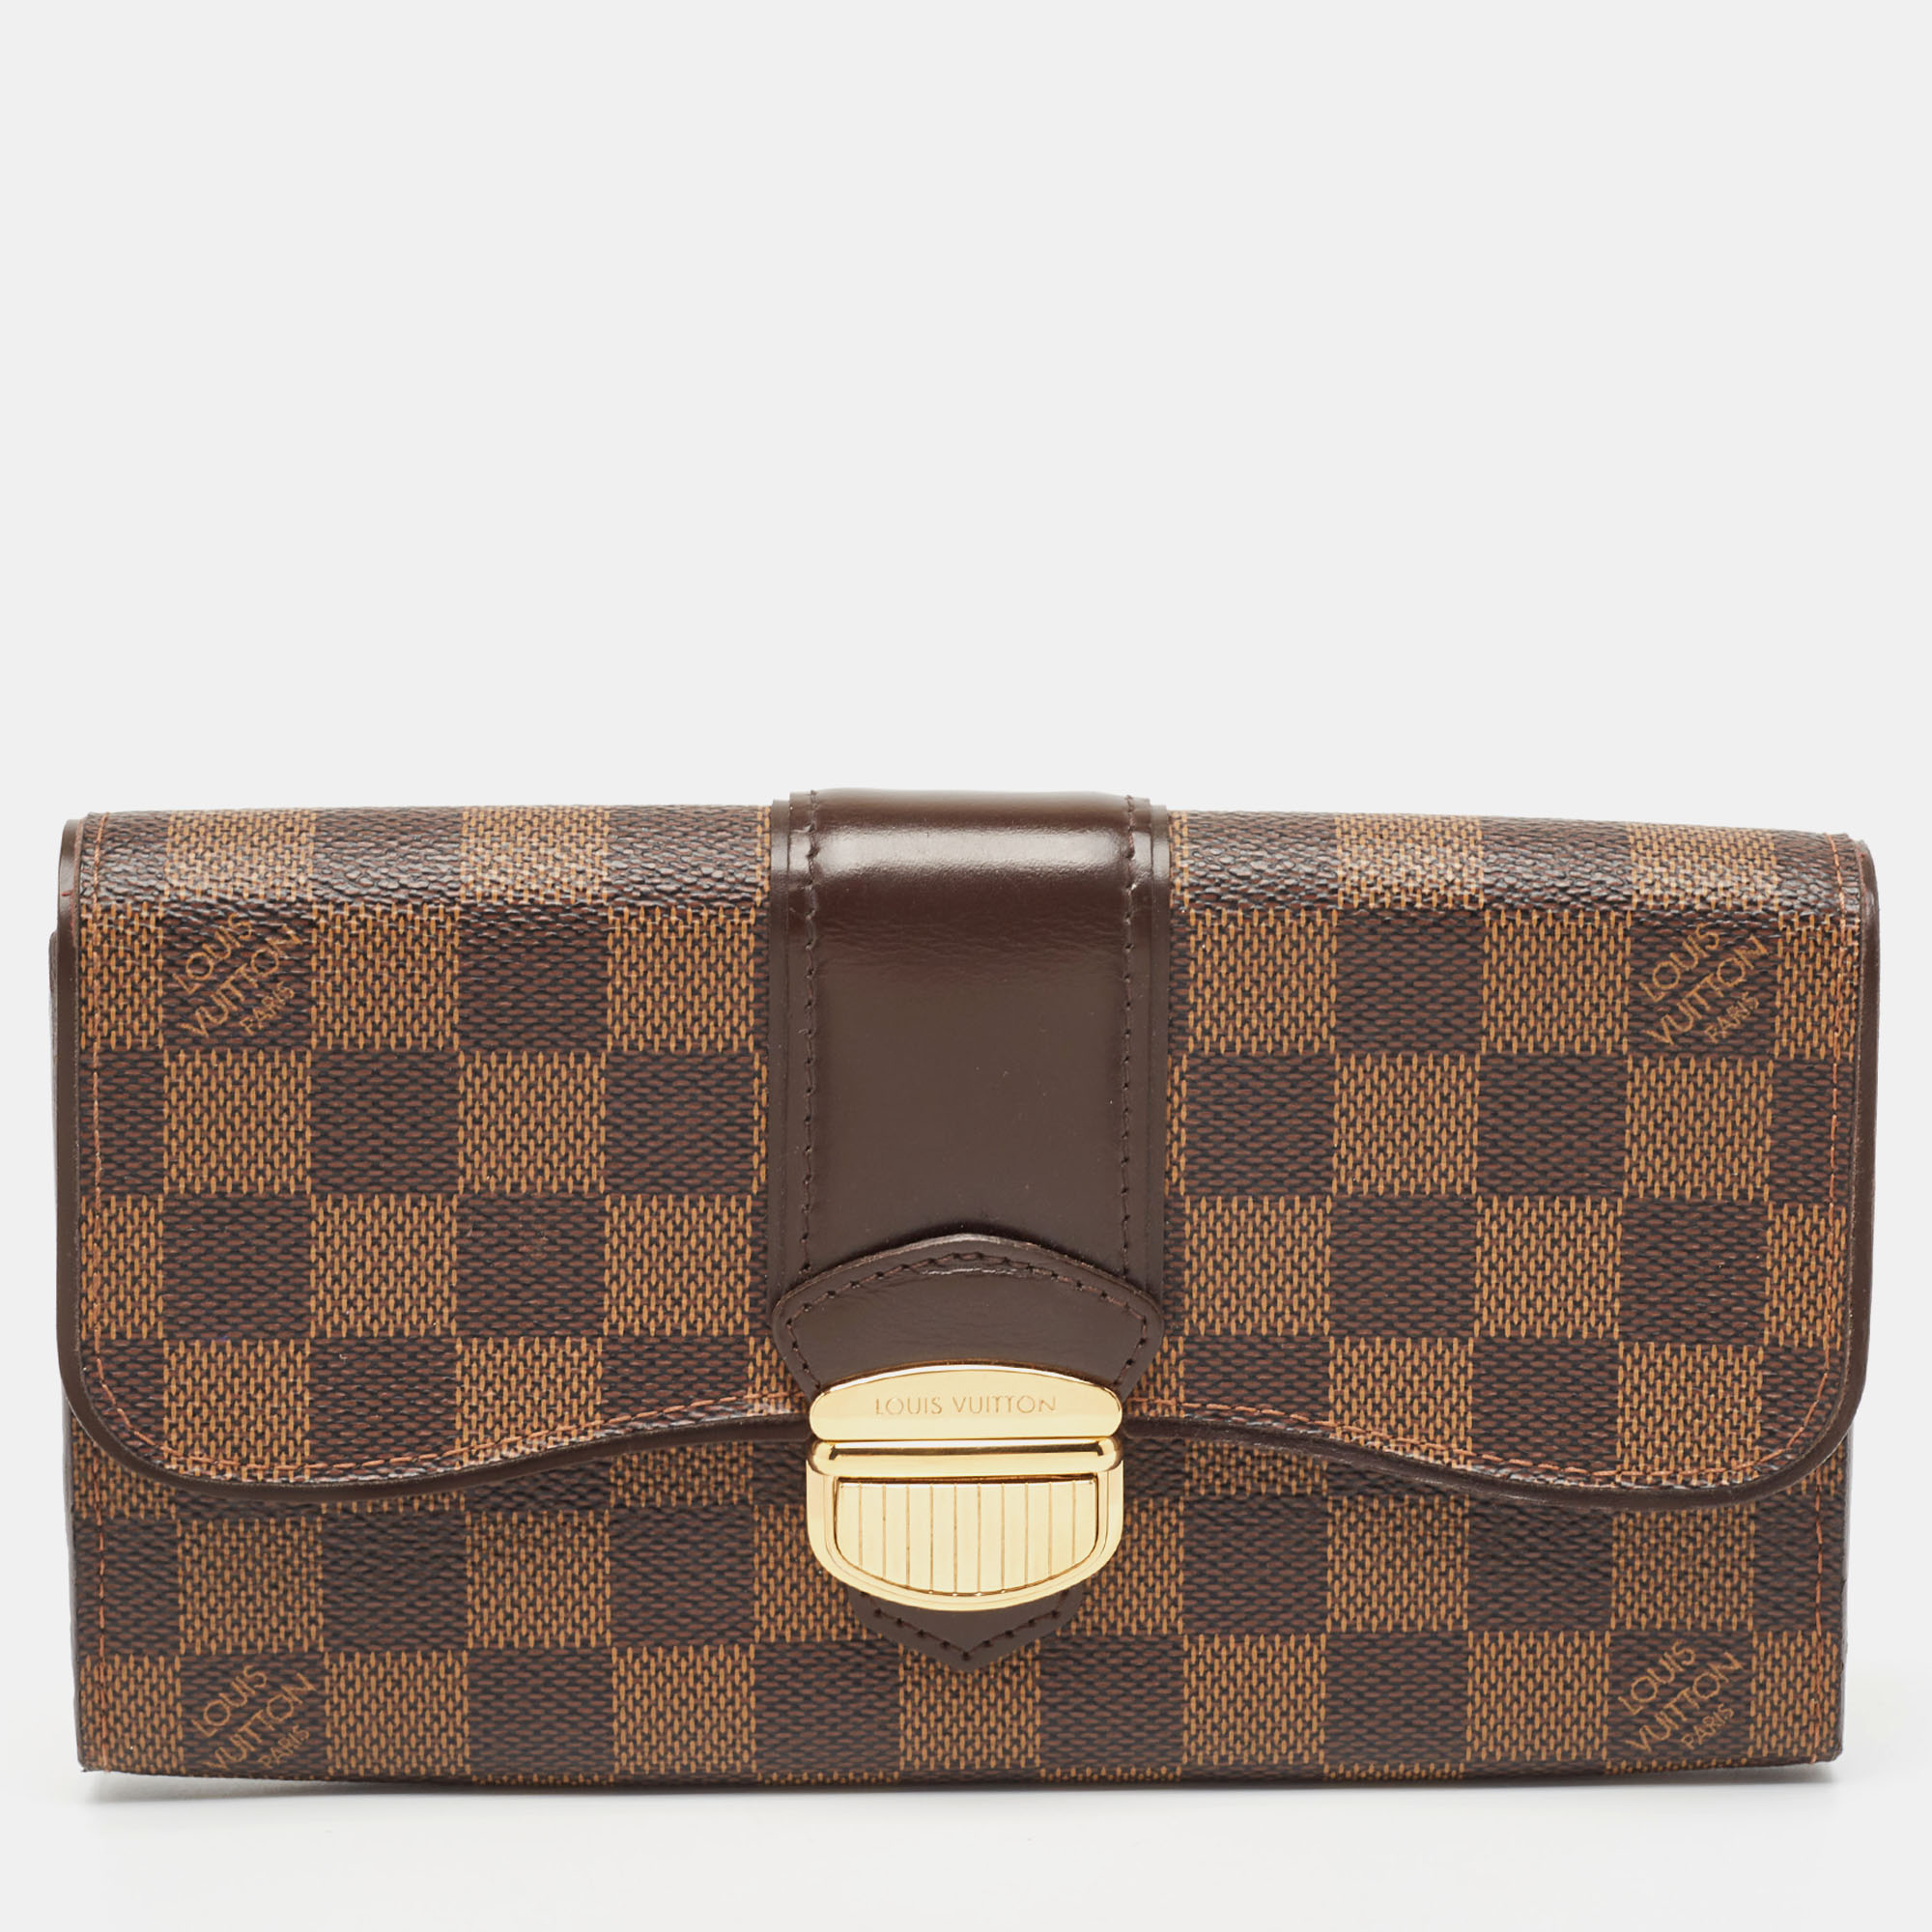 Pre-owned Louis Vuitton Damier Ebene Canvas Sistina Wallet In Brown